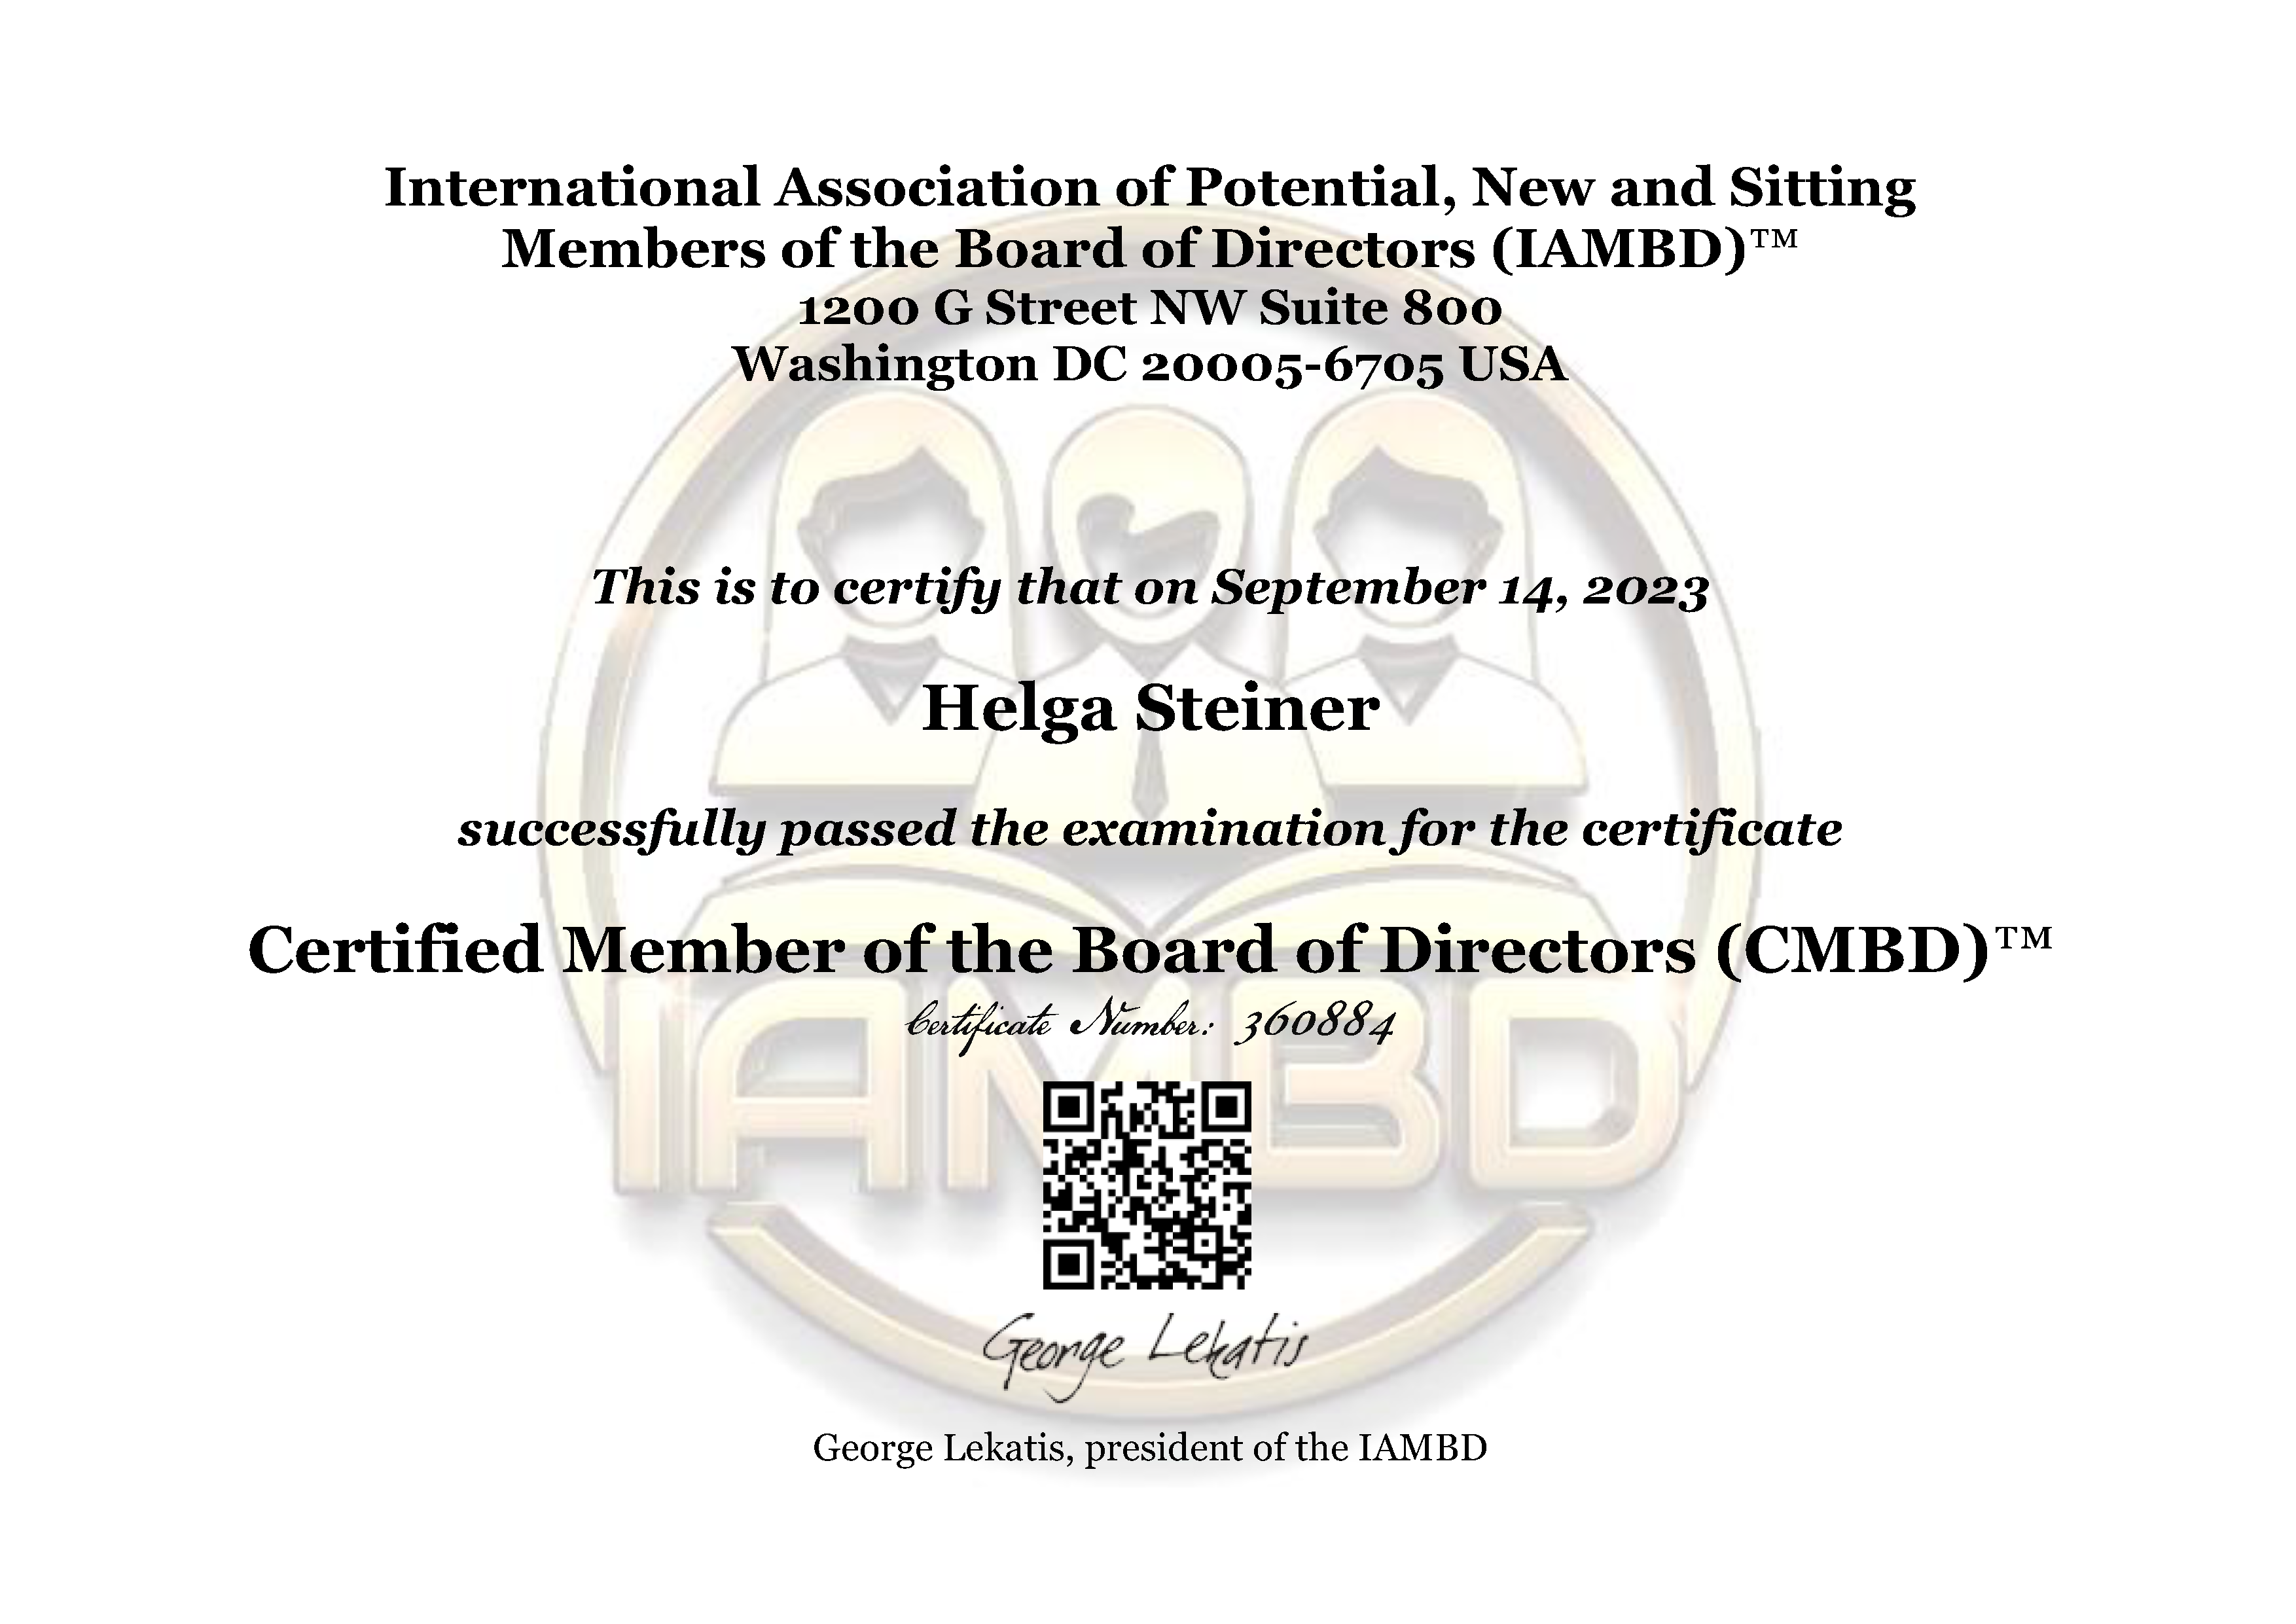 Certified Member of the Board of Directors (CMBD)